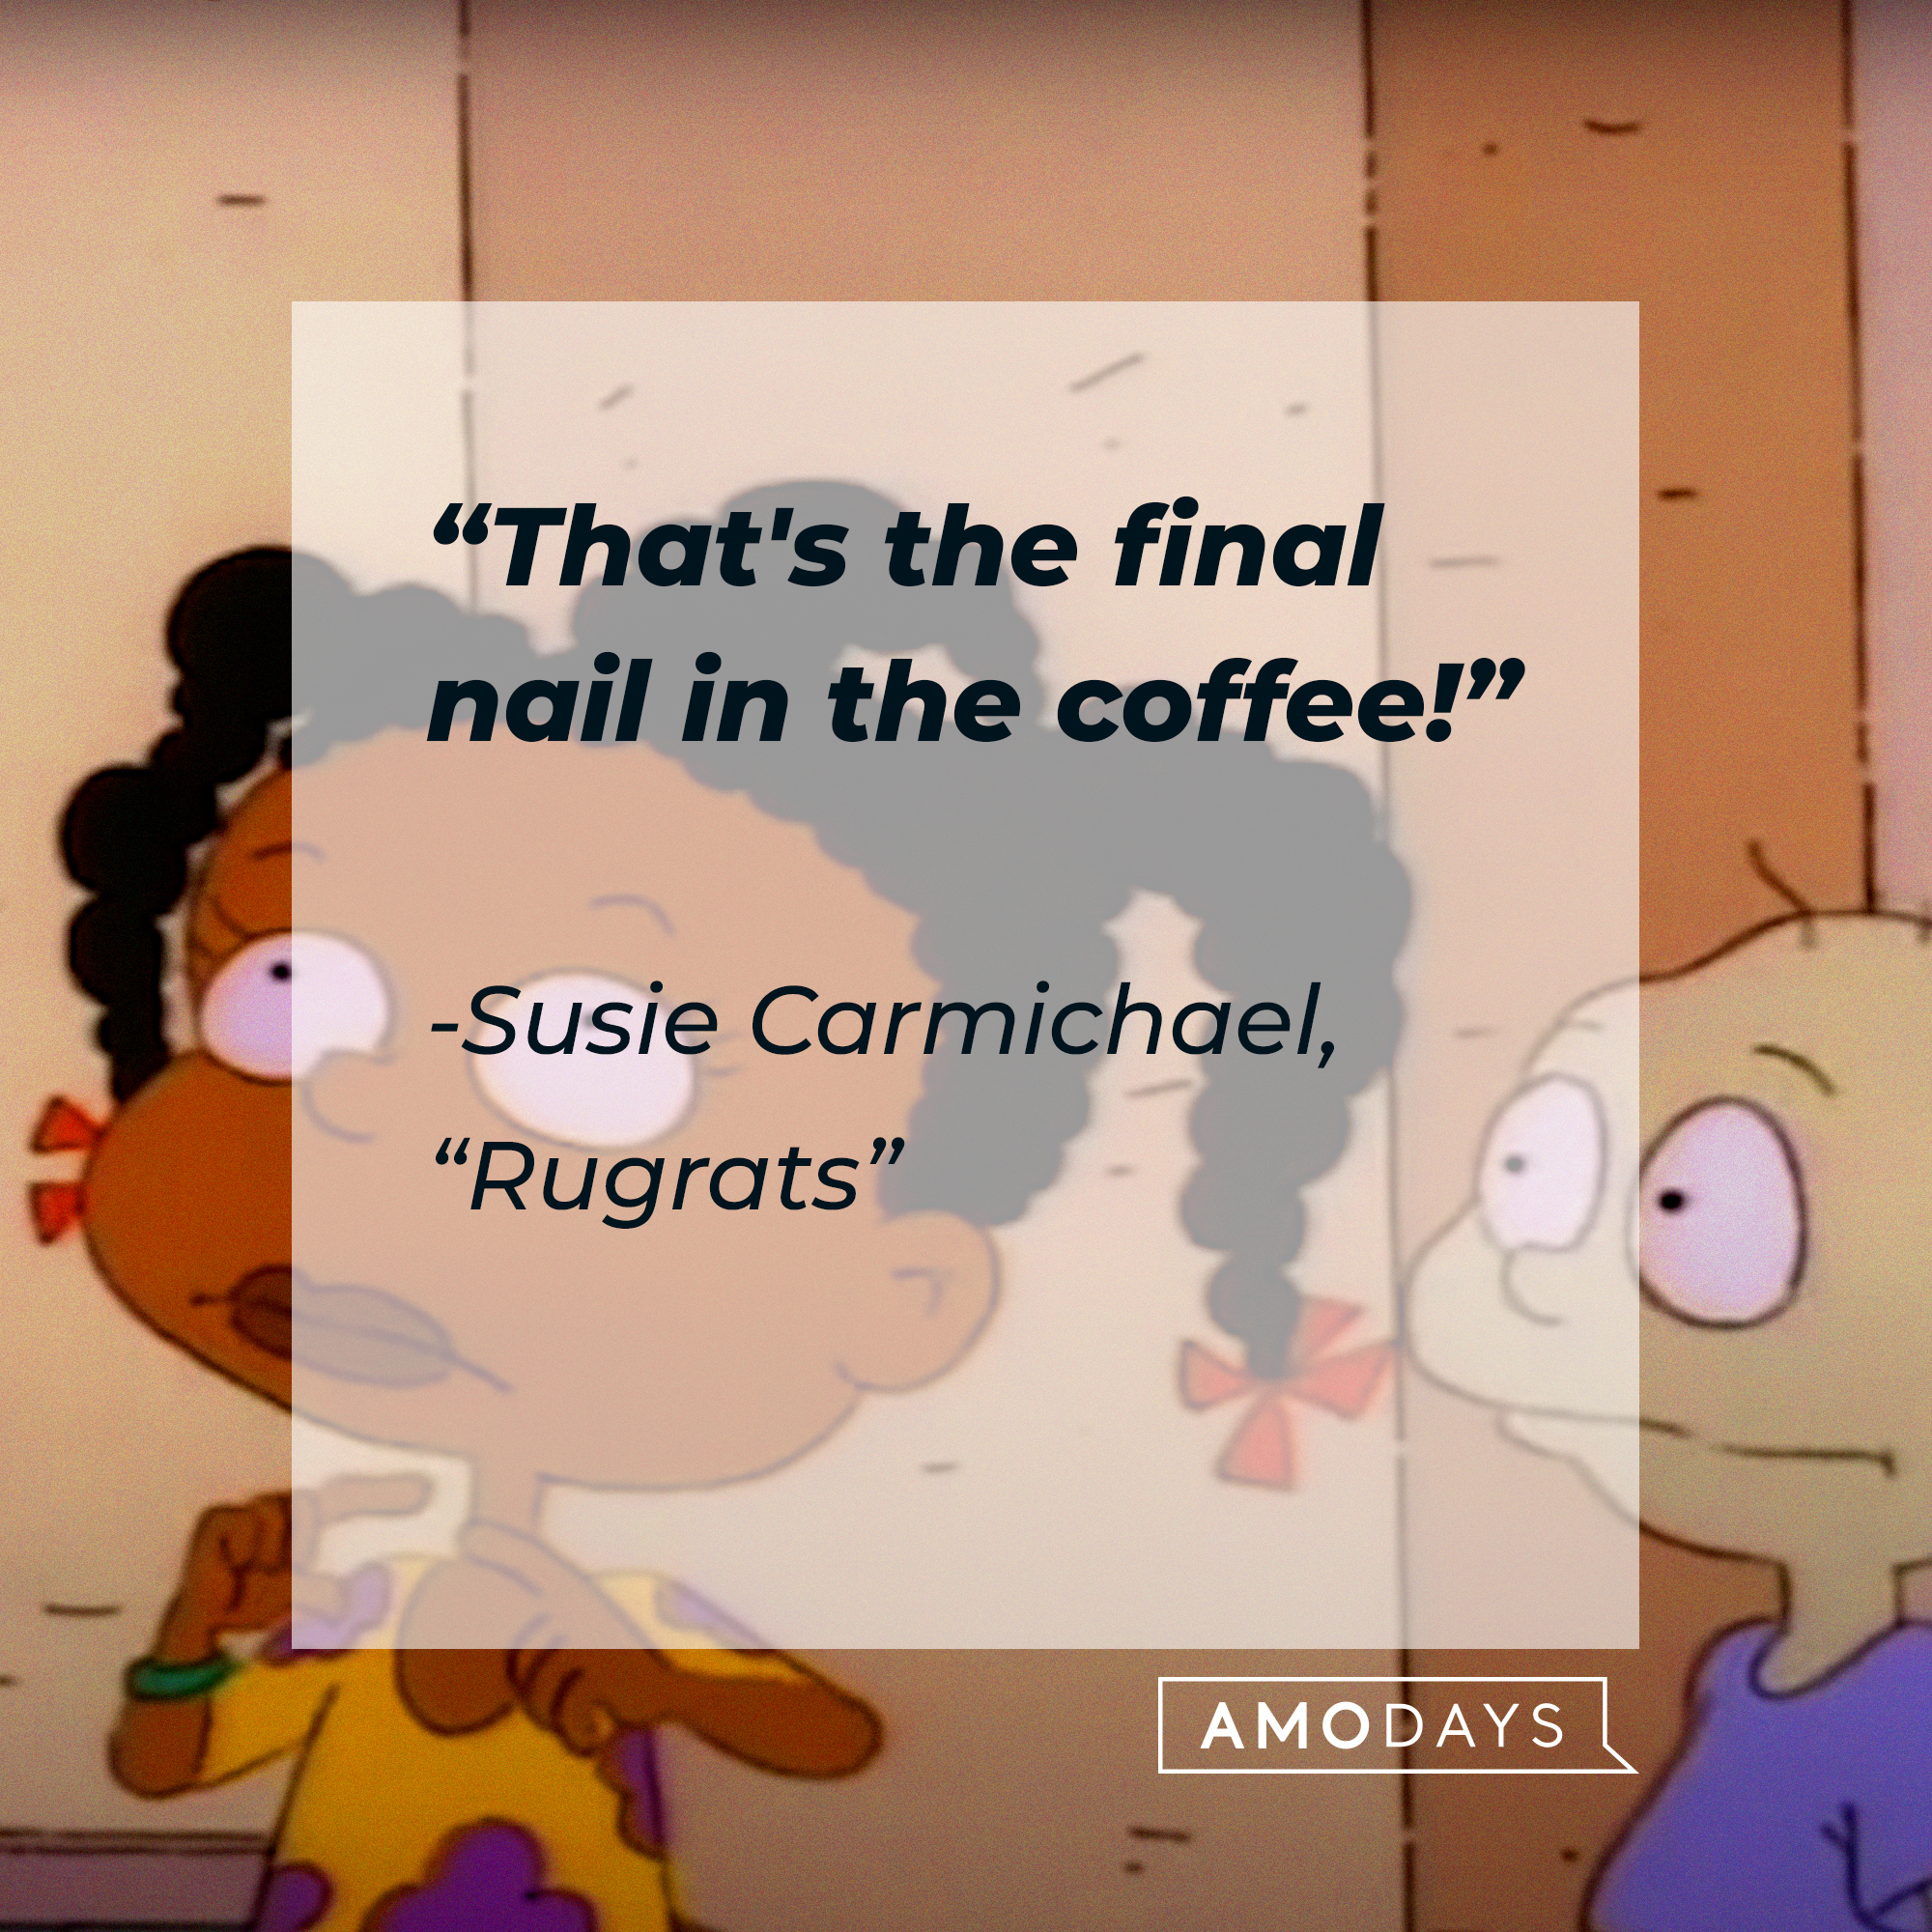 Susie Carmichael with her quote: “That's the final nail in the coffee!”  | Source: Facebook.com/Rugrats